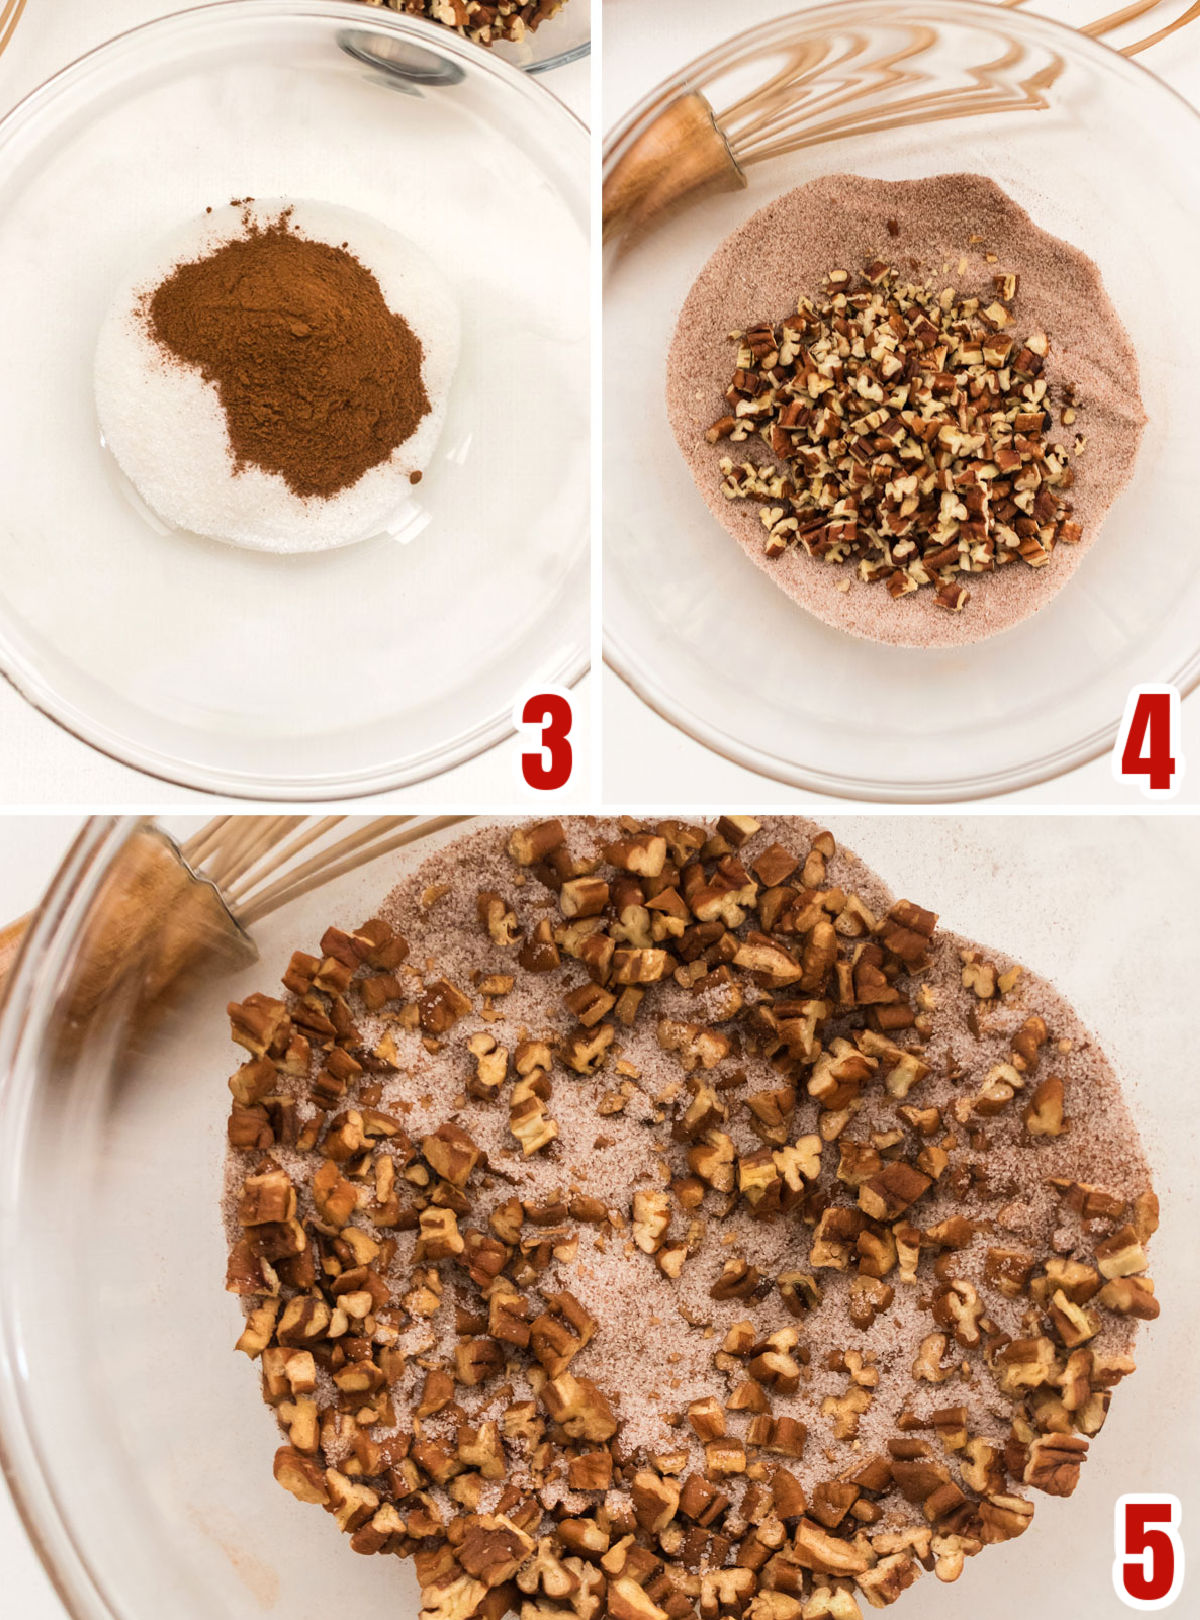 Collage image showing how to make the Cinnamon Sugar Filling for the Christmas Morning Coffee Cake.